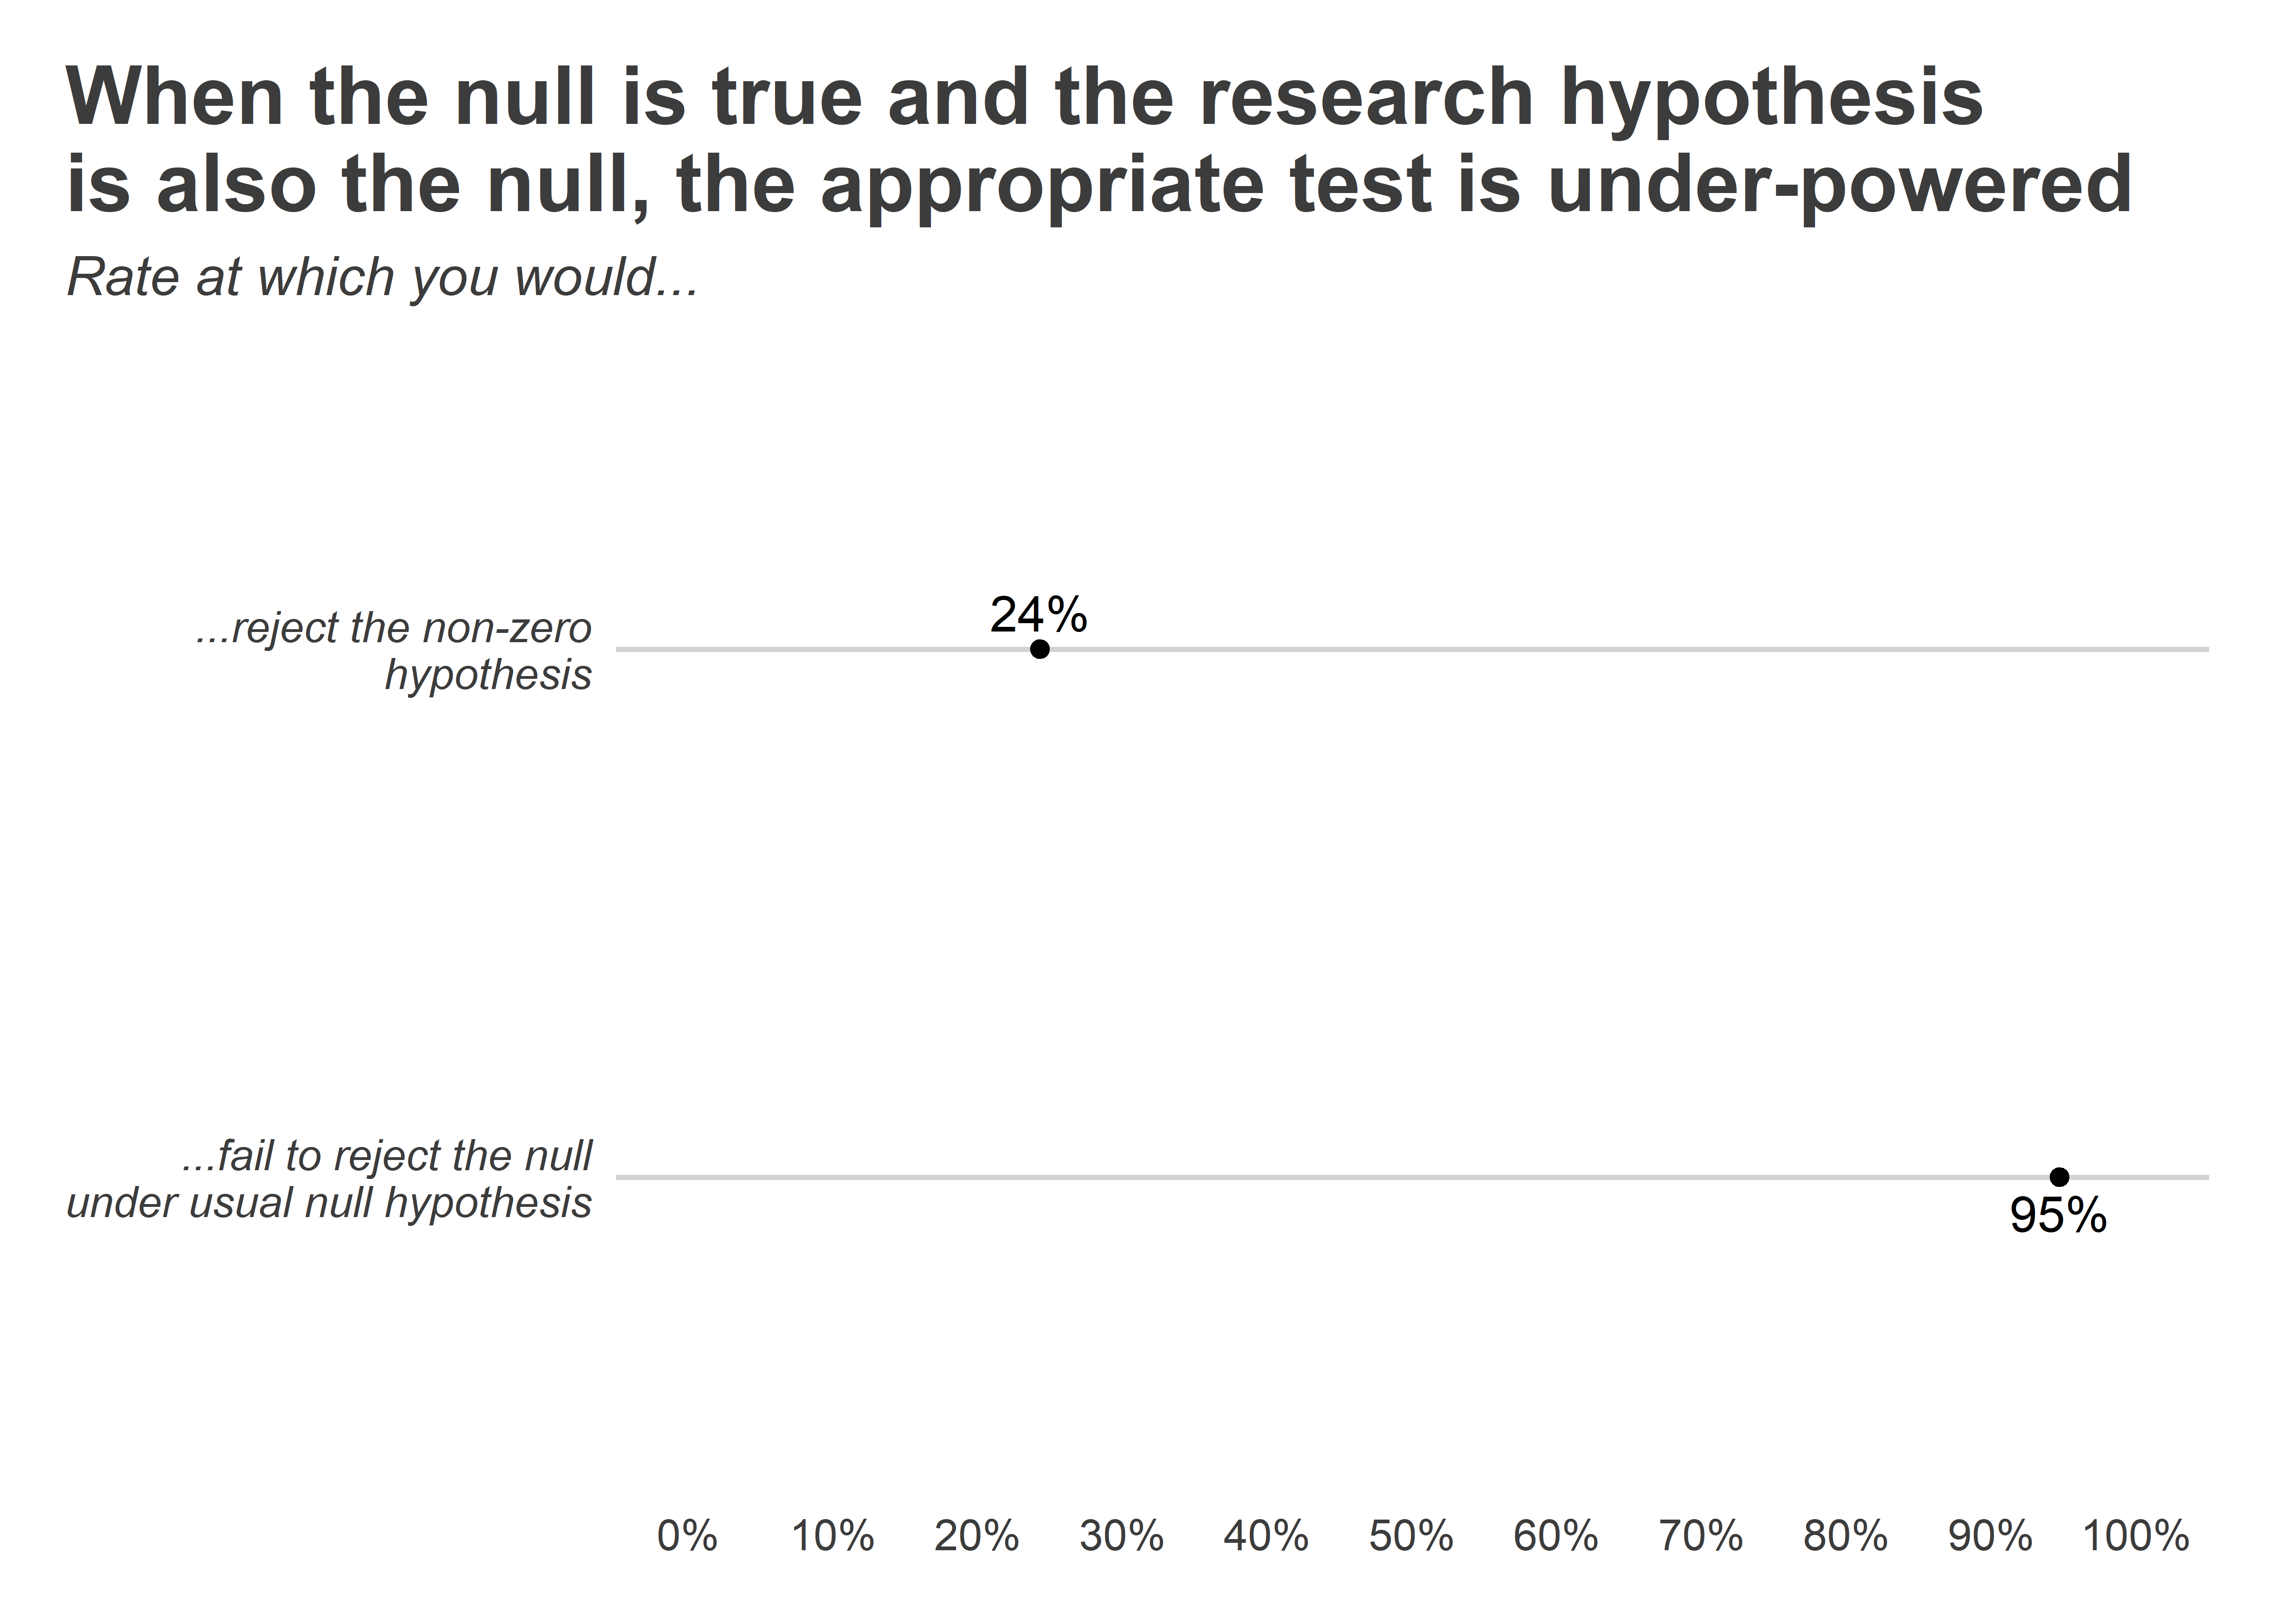 state the null hypothesis for the experiment